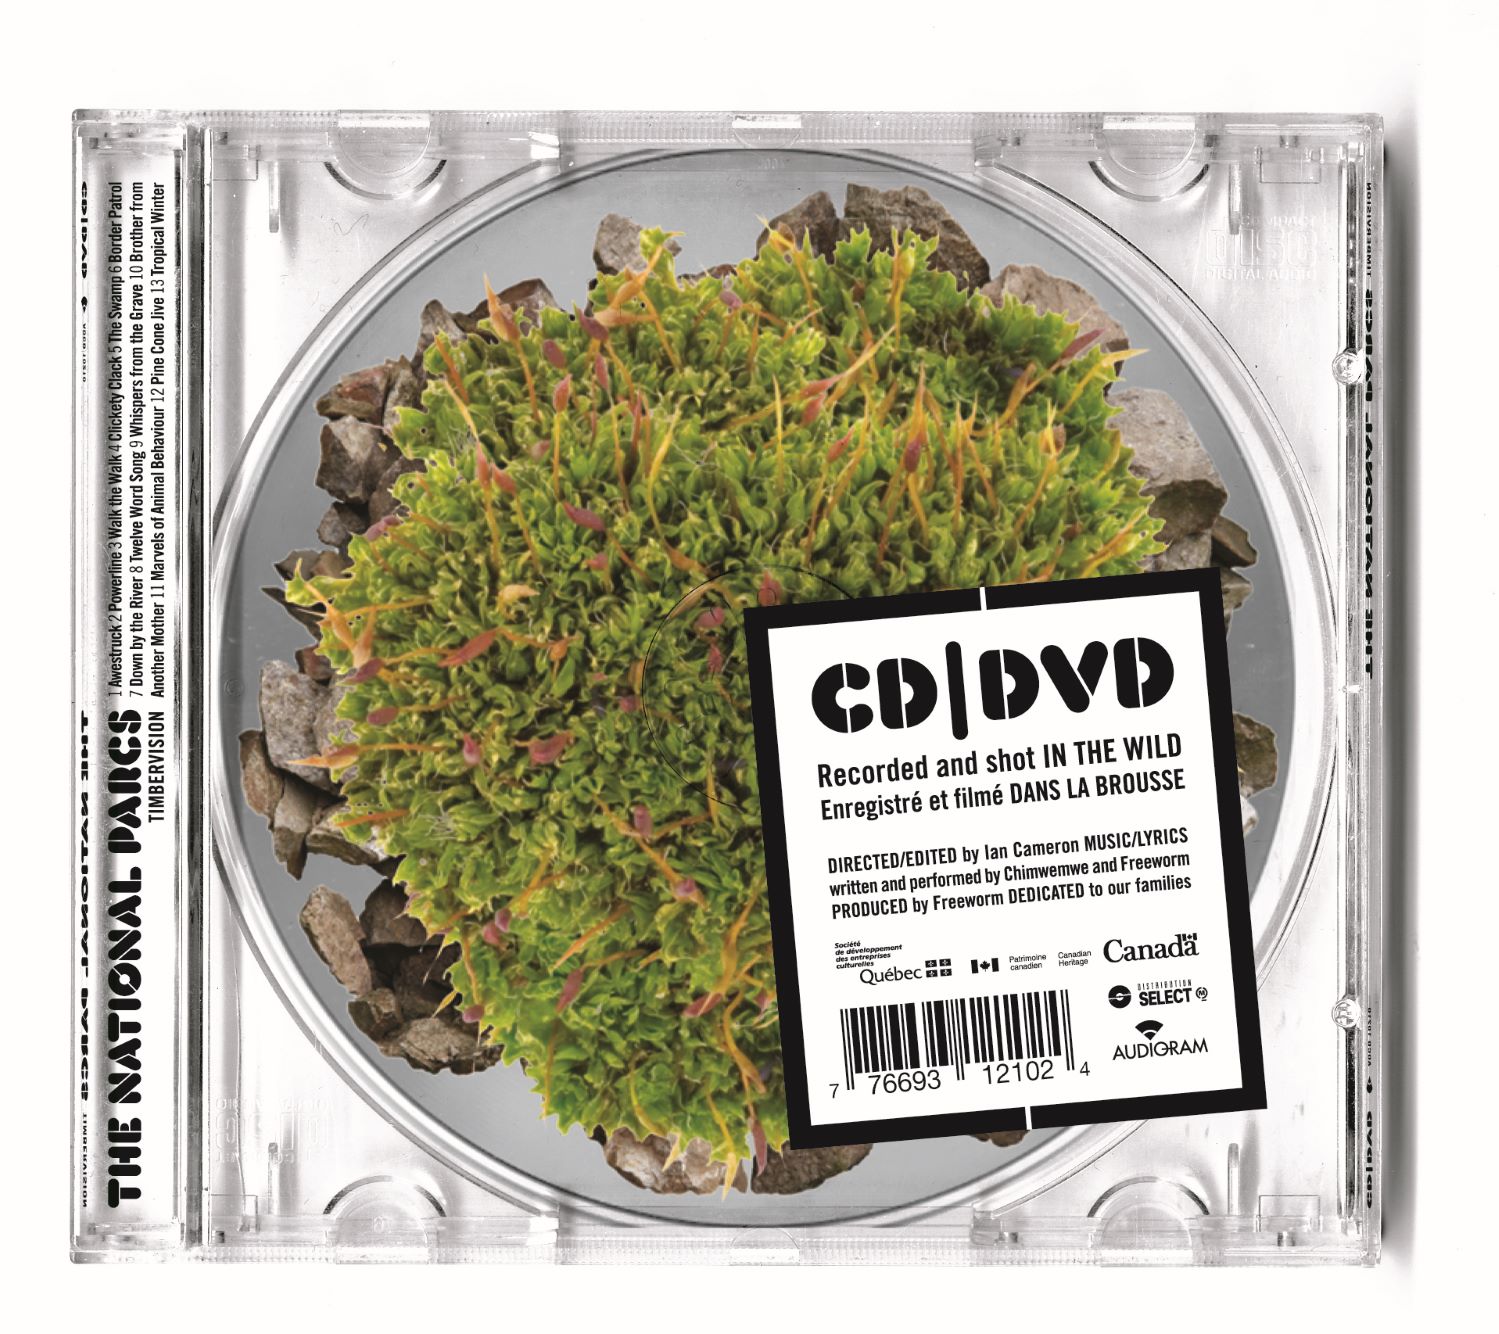 Timbervision (cd/dvd)